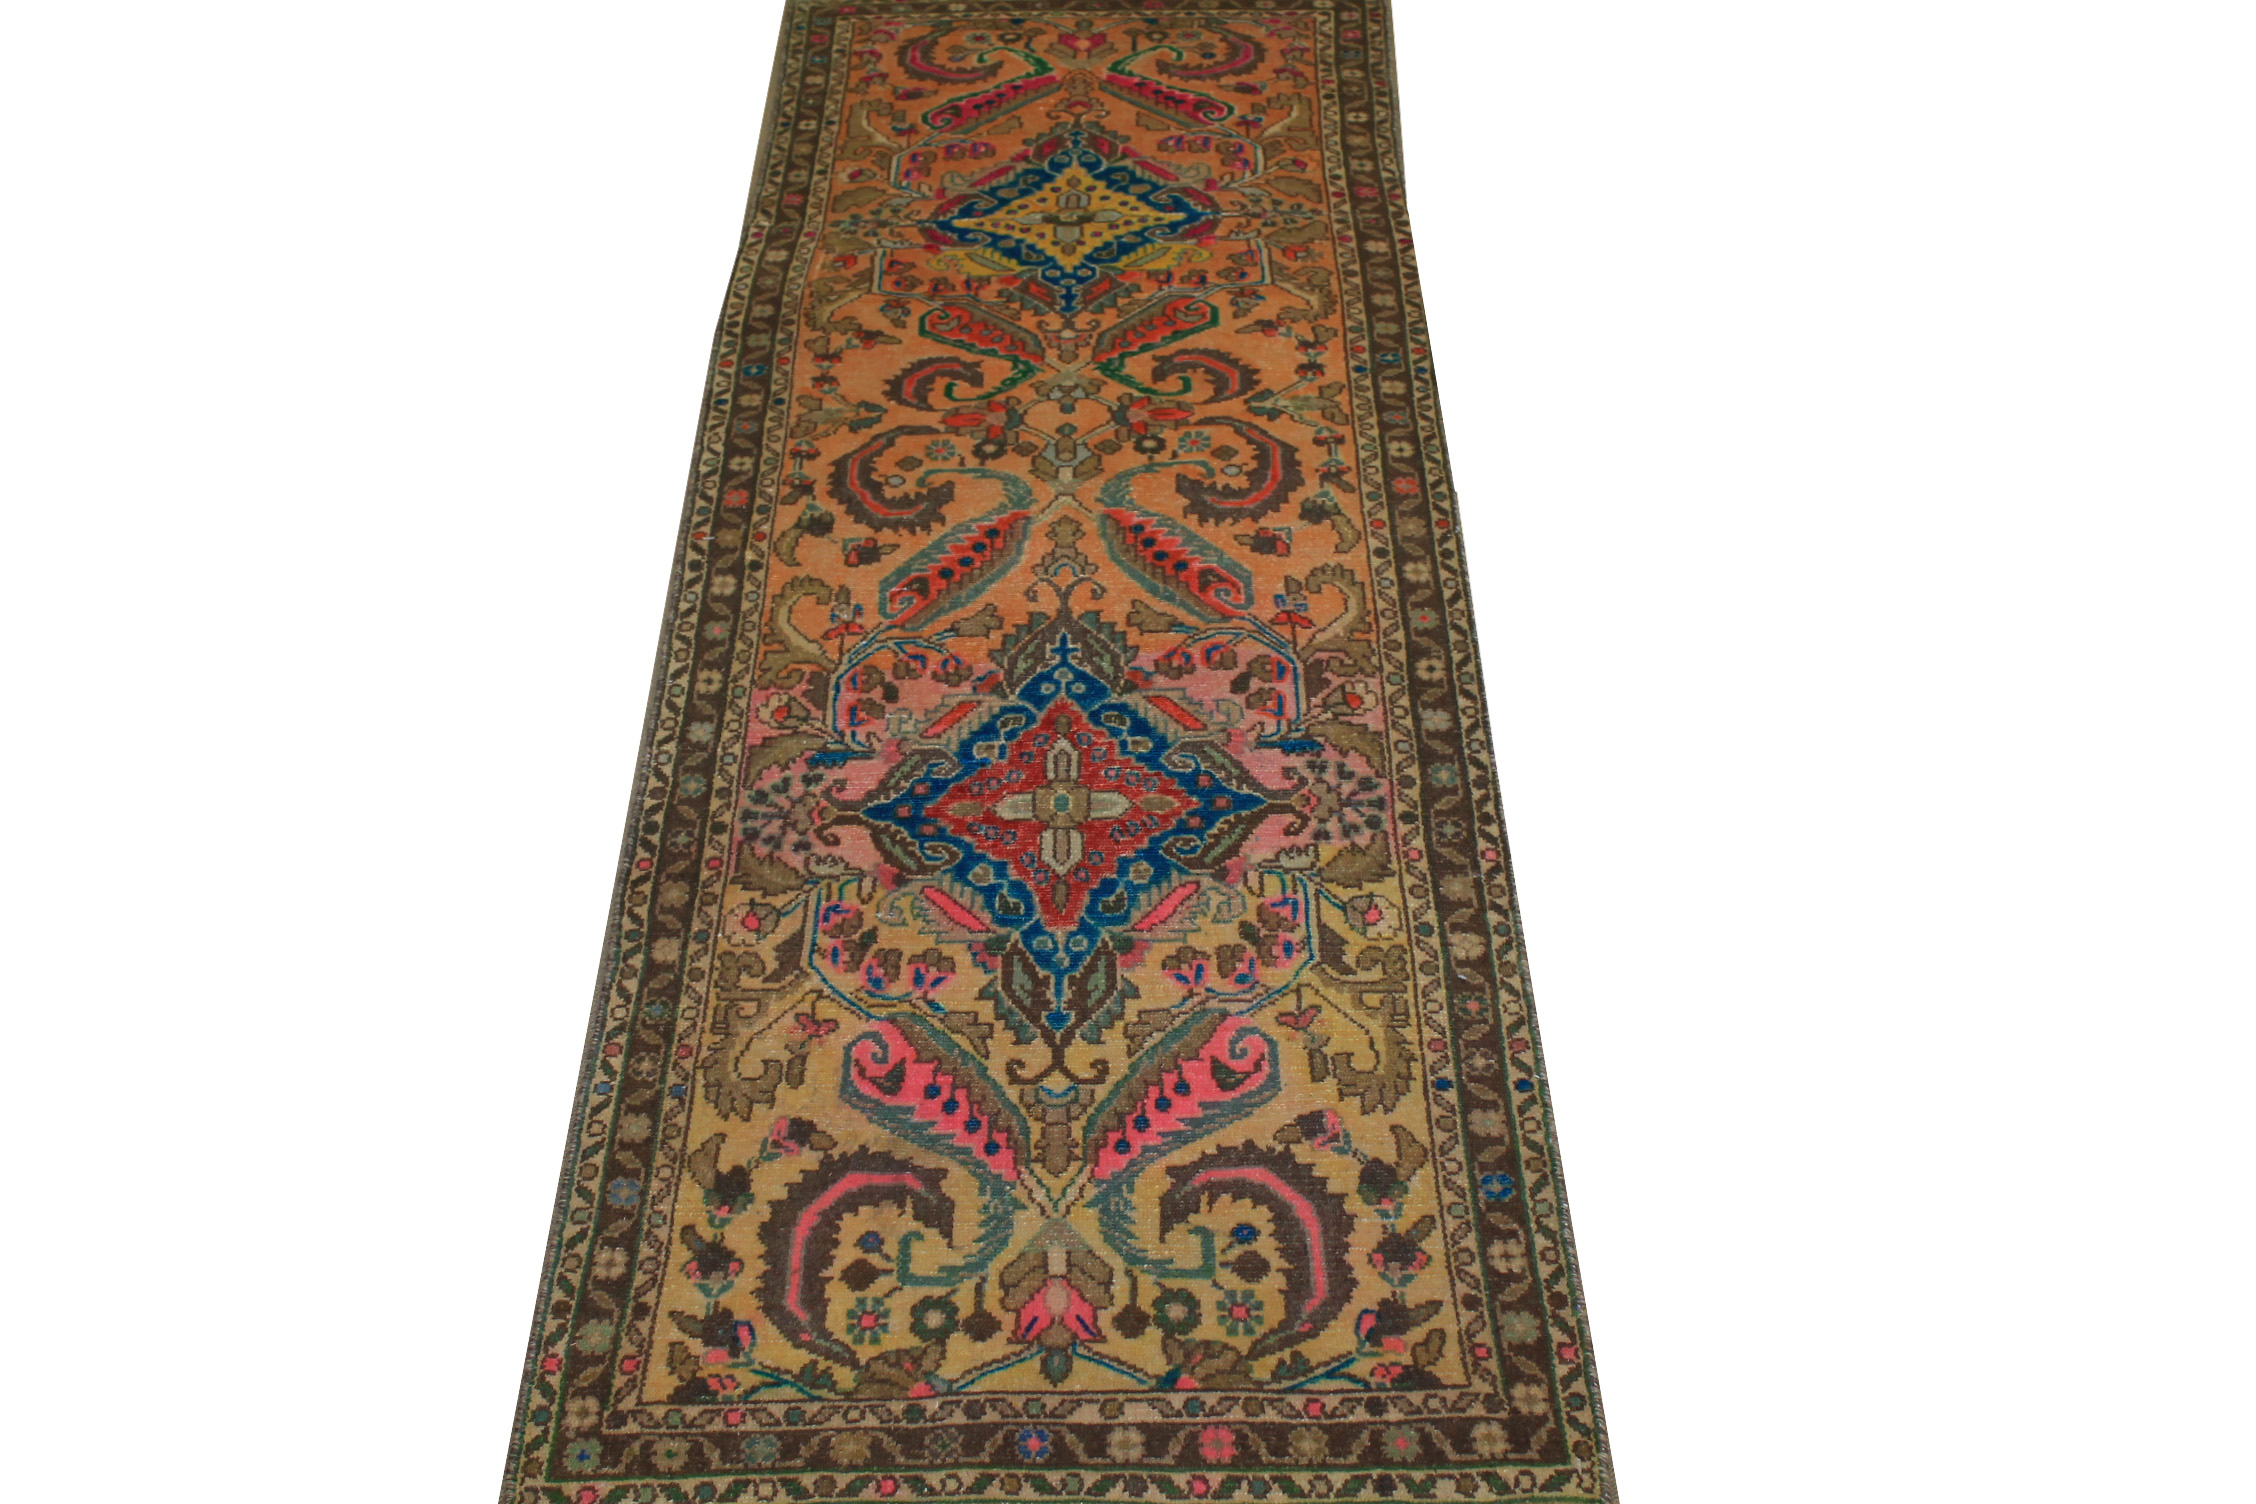 6 ft. Runner Vintage Hand Knotted Wool Area Rug - MR024446